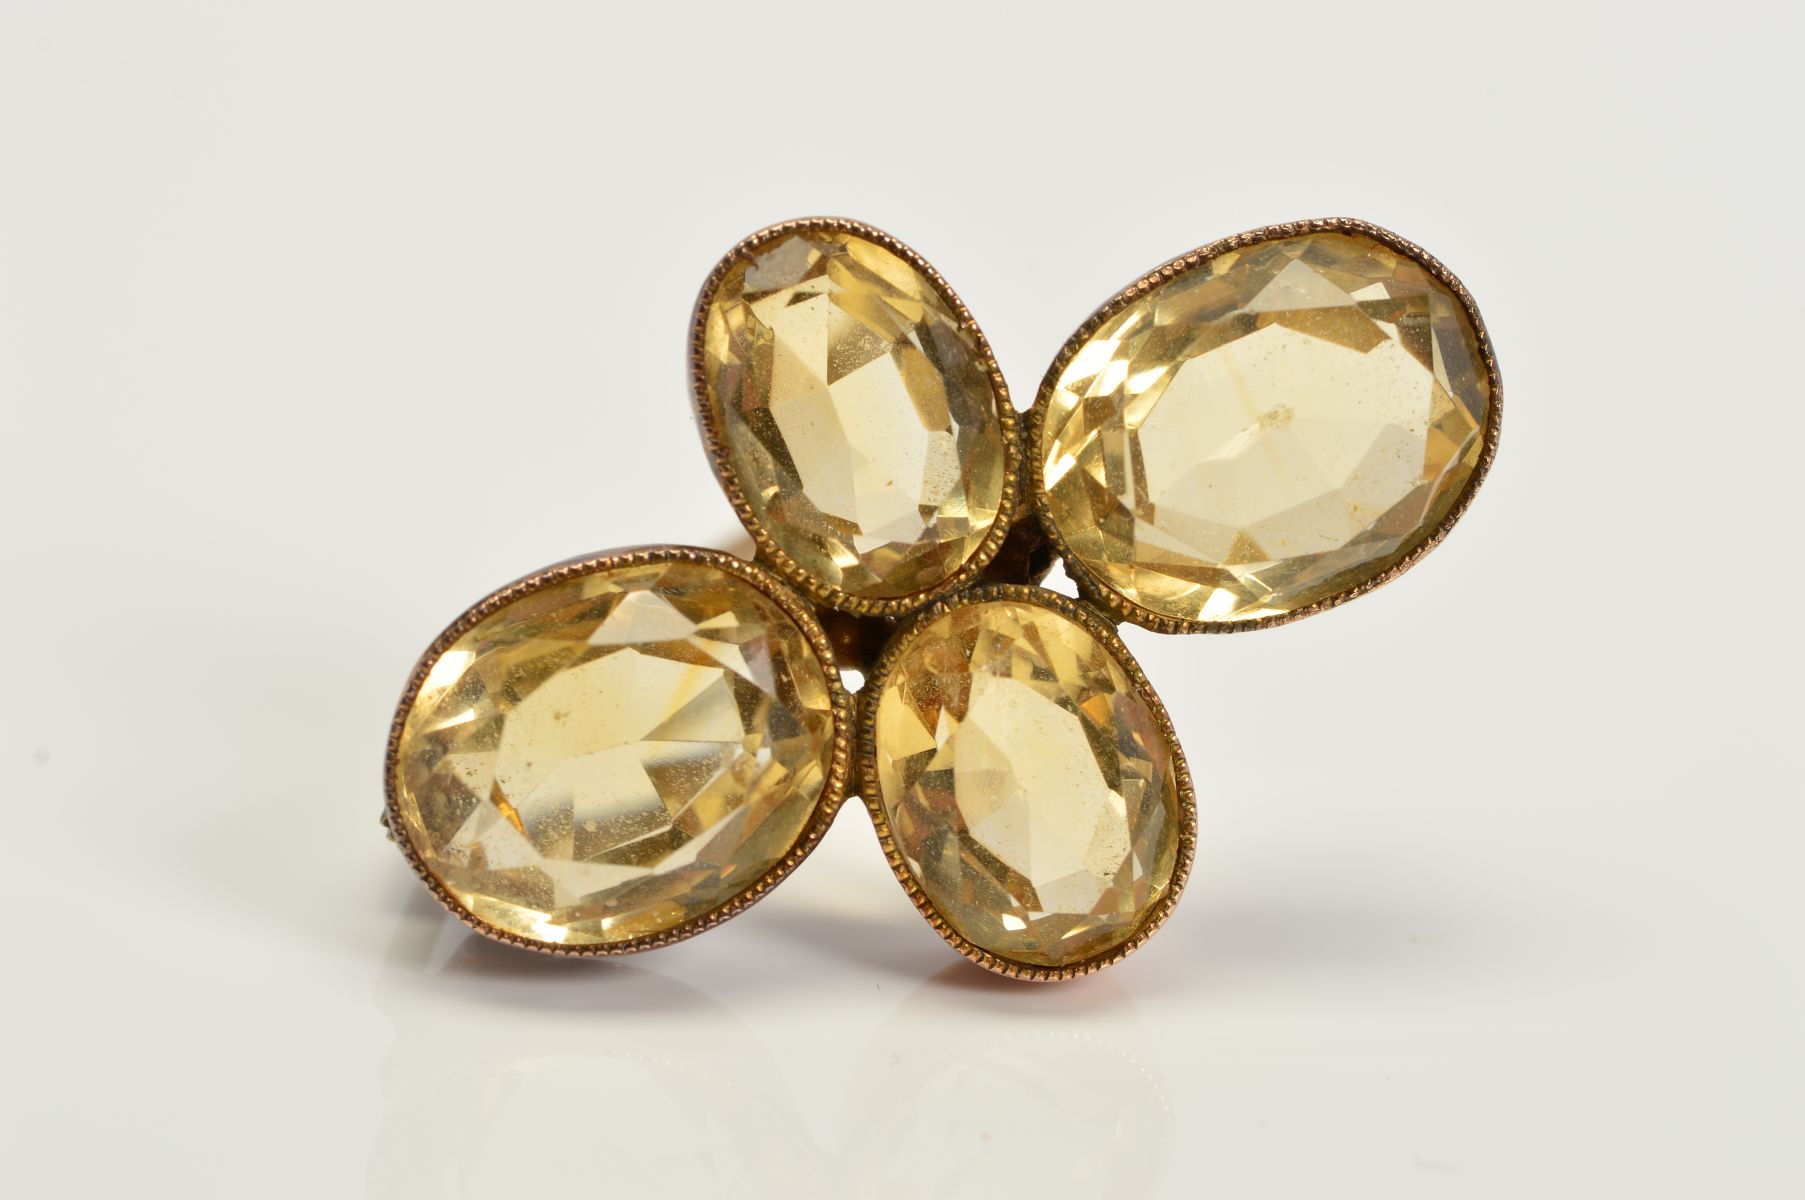 AN EARLY 20TH CENTURY CITRINE QUATREFOIL DESIGN BROOCH, measuring approximately 30.0mm x 25.0mm,